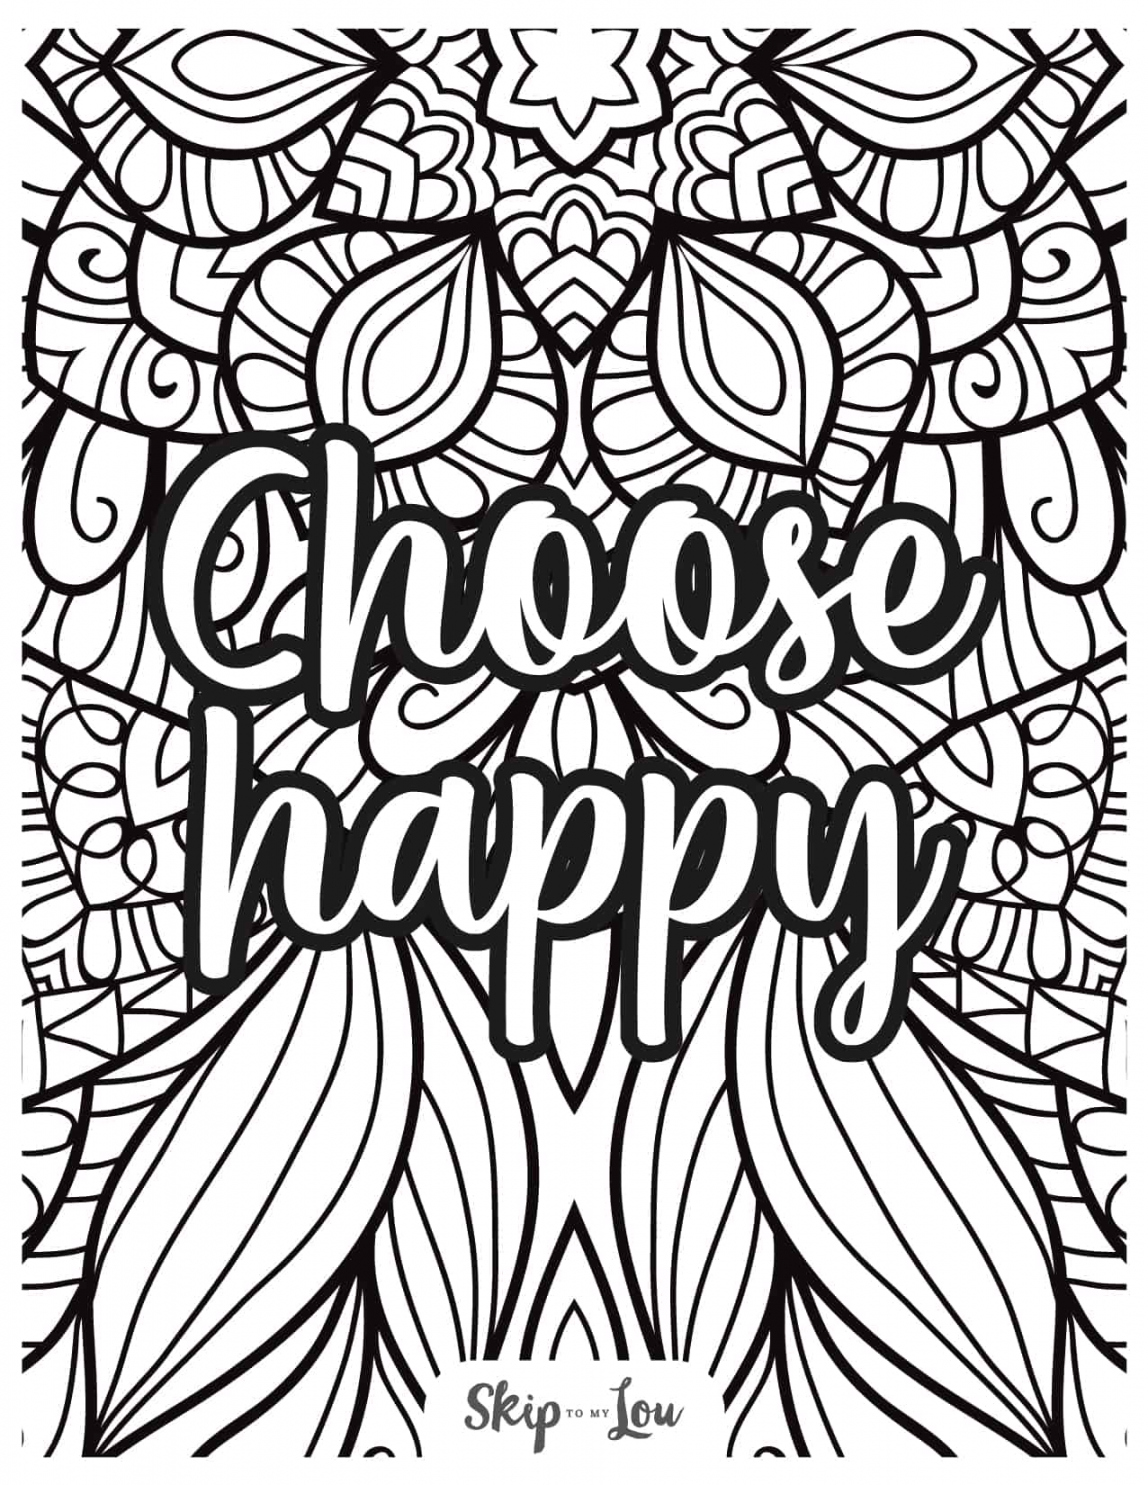 Coloring Pages Free Printables - Printable - Free Coloring Pages For Adults  Skip To My Lou